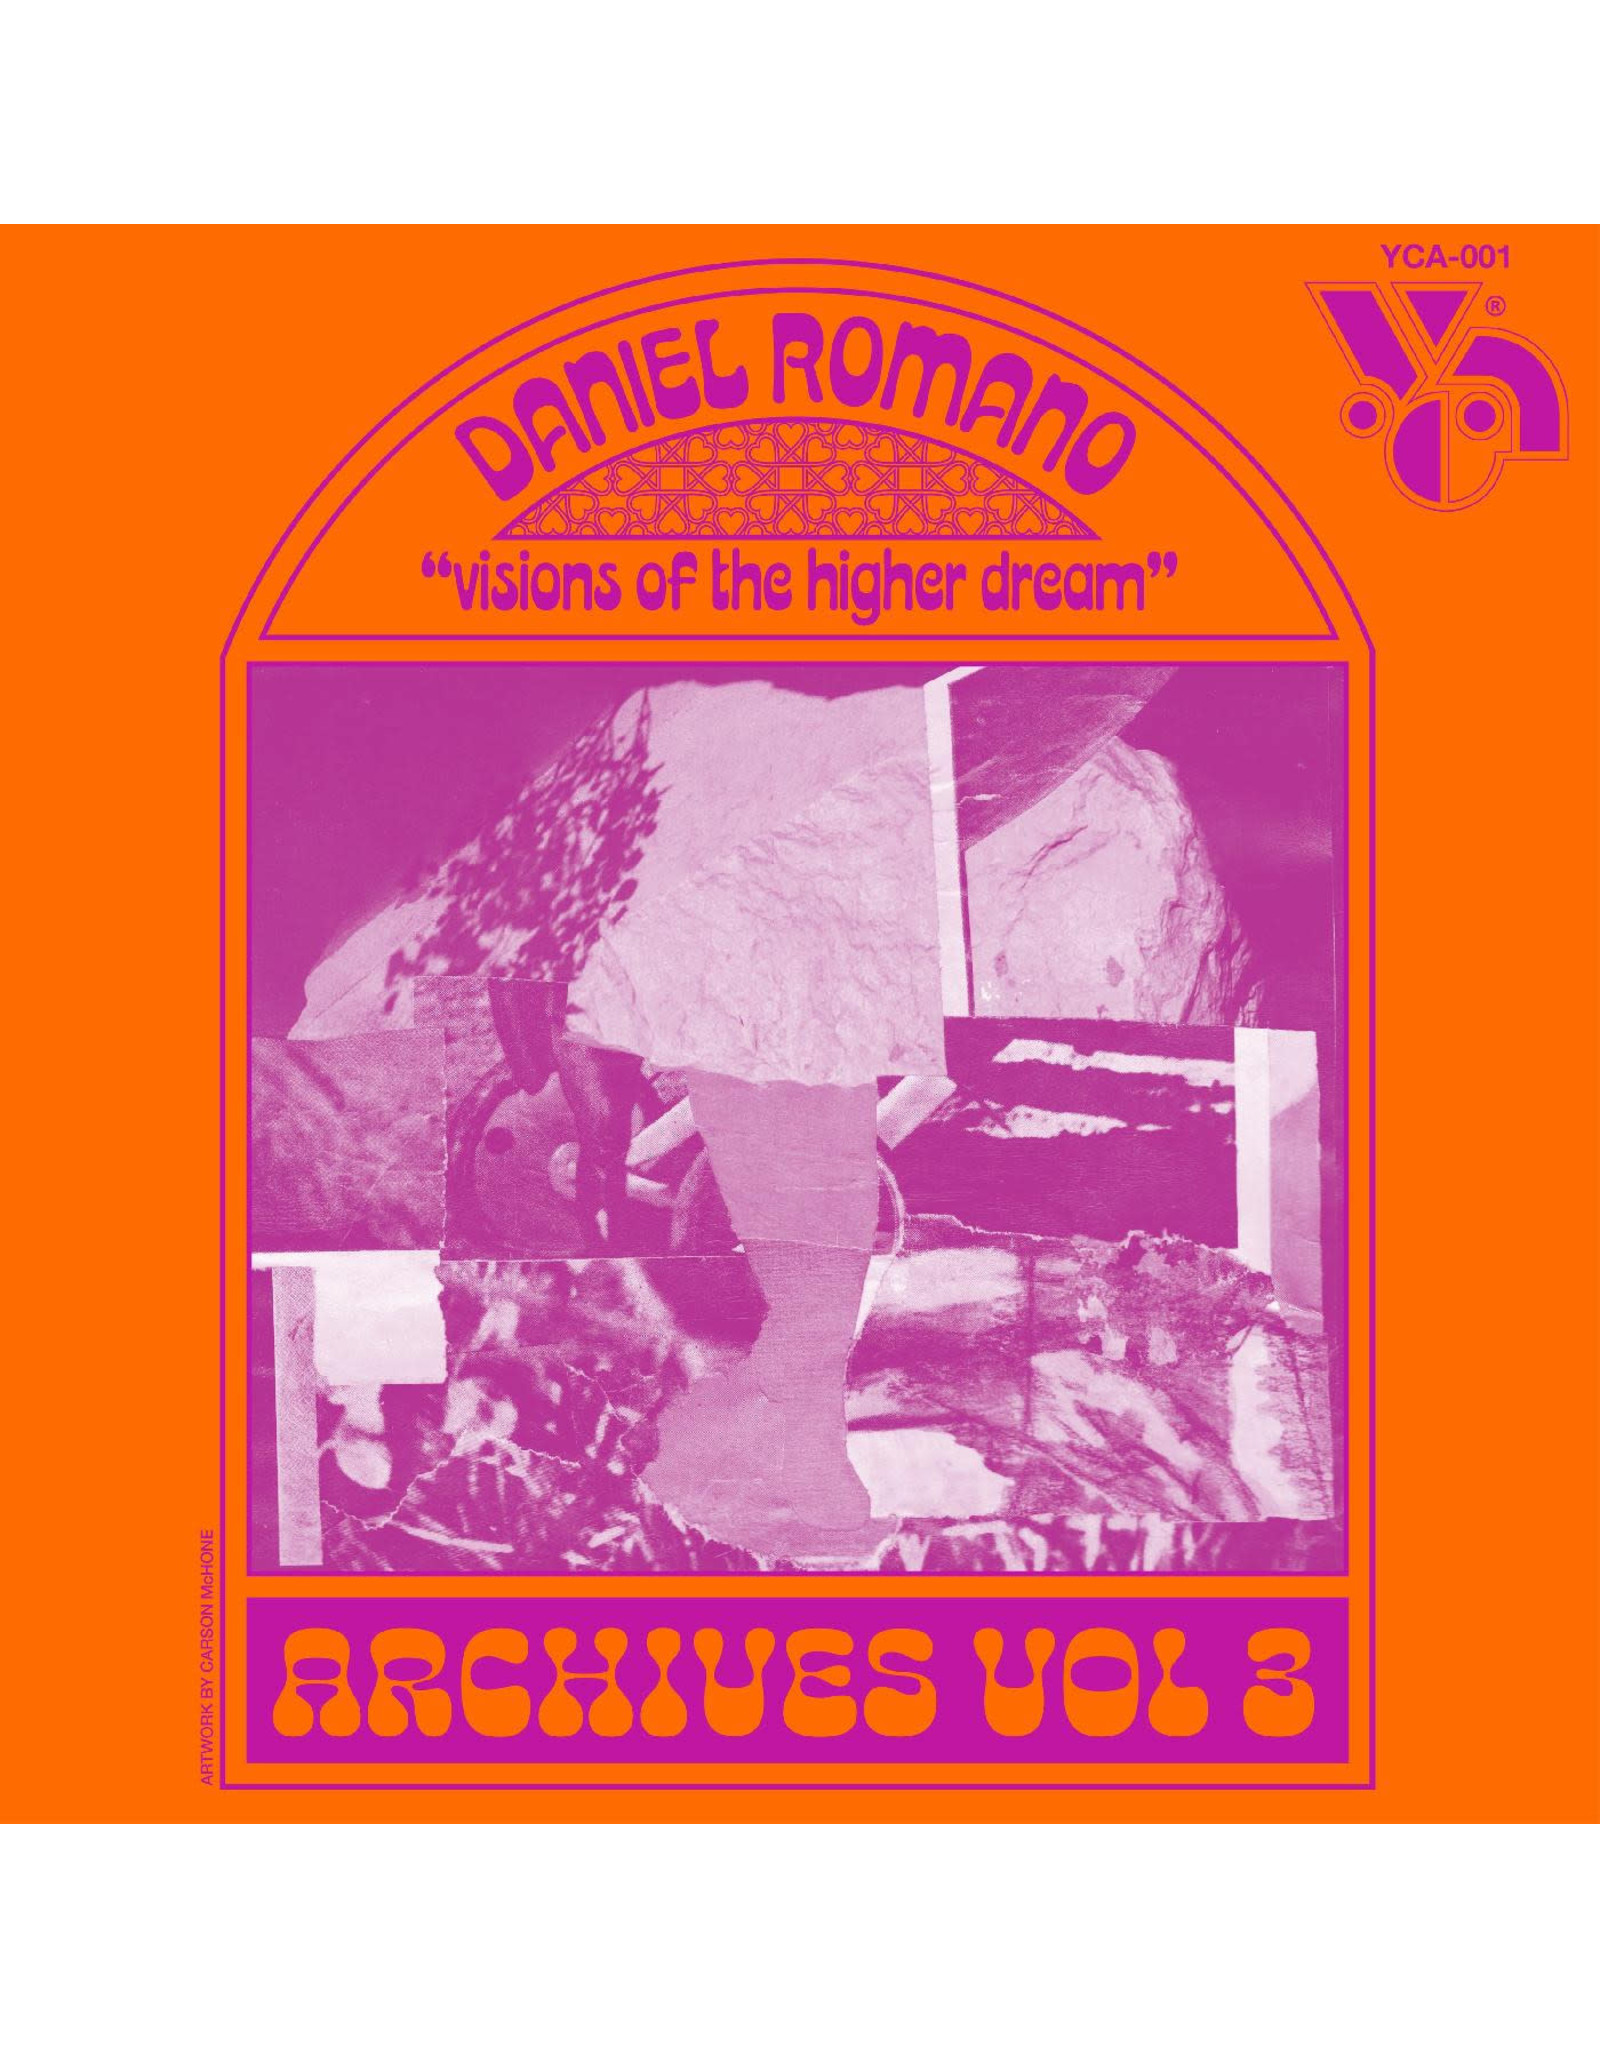 You've Changed Romano, Daniel: Visions Of The Higher Dream LP